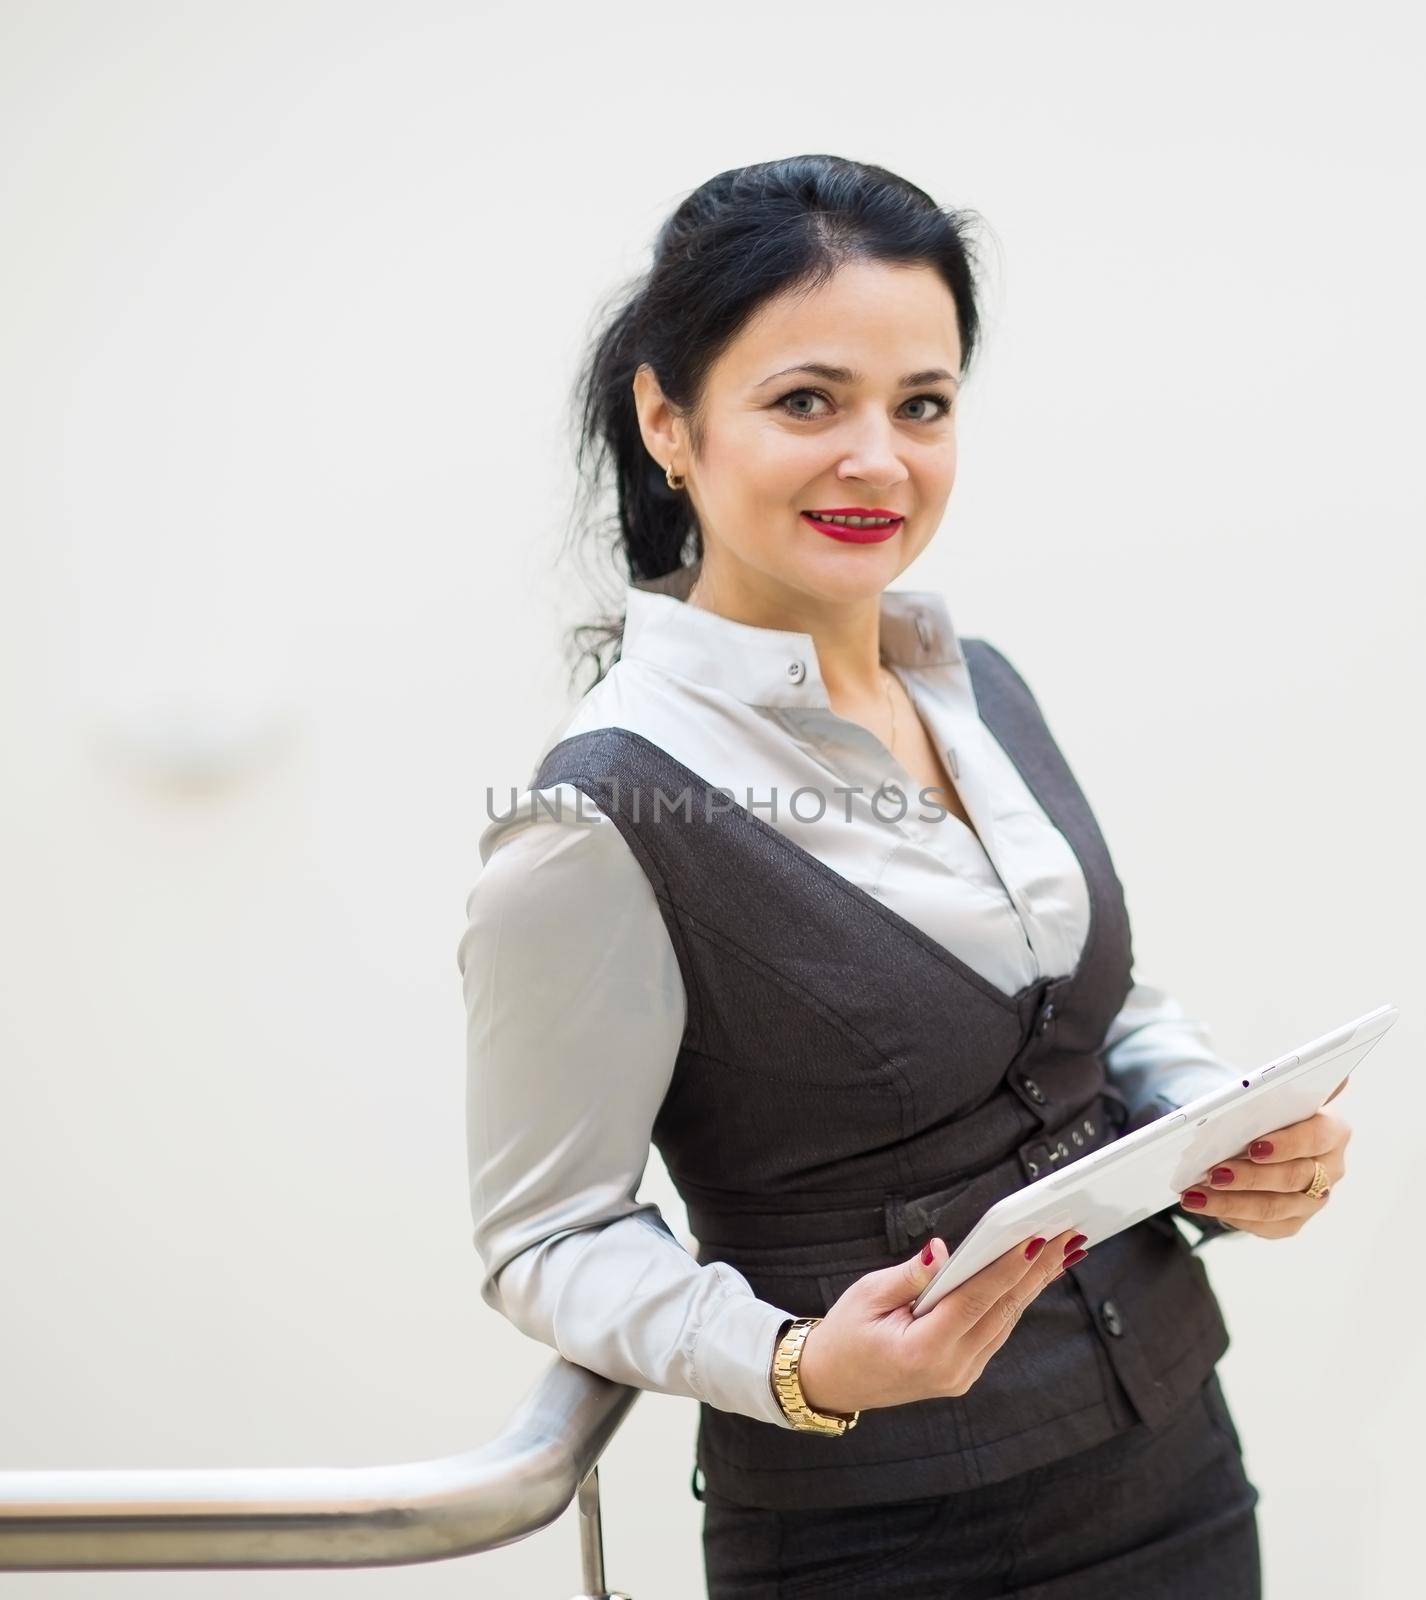 Portrait of a business woman on a good working day by SmartPhotoLab